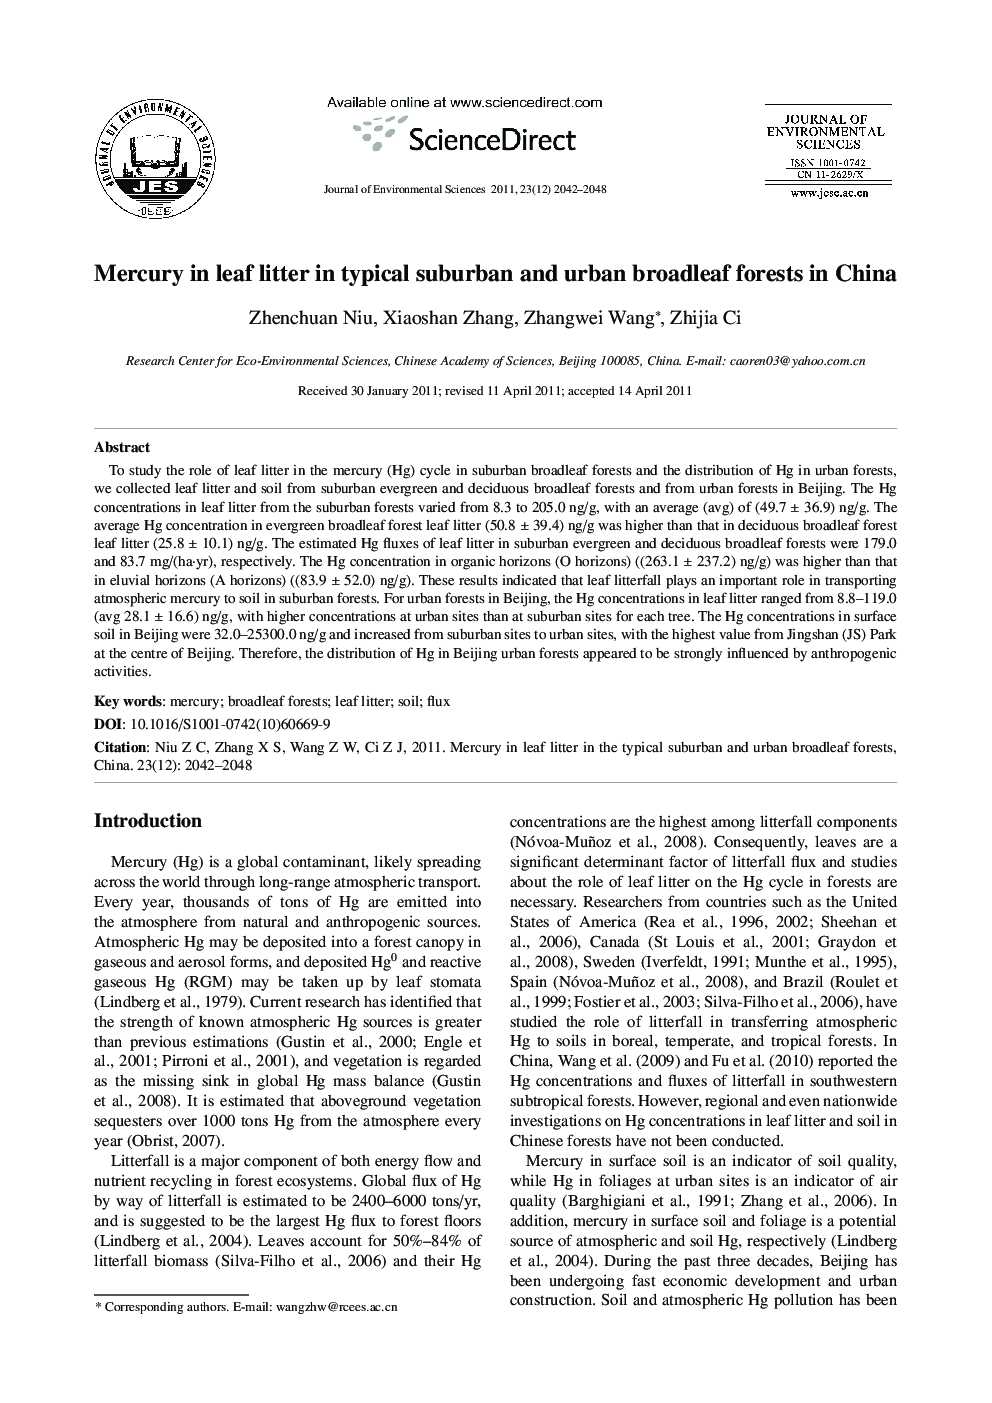 Mercury in leaf litter in typical suburban and urban broadleaf forests in China